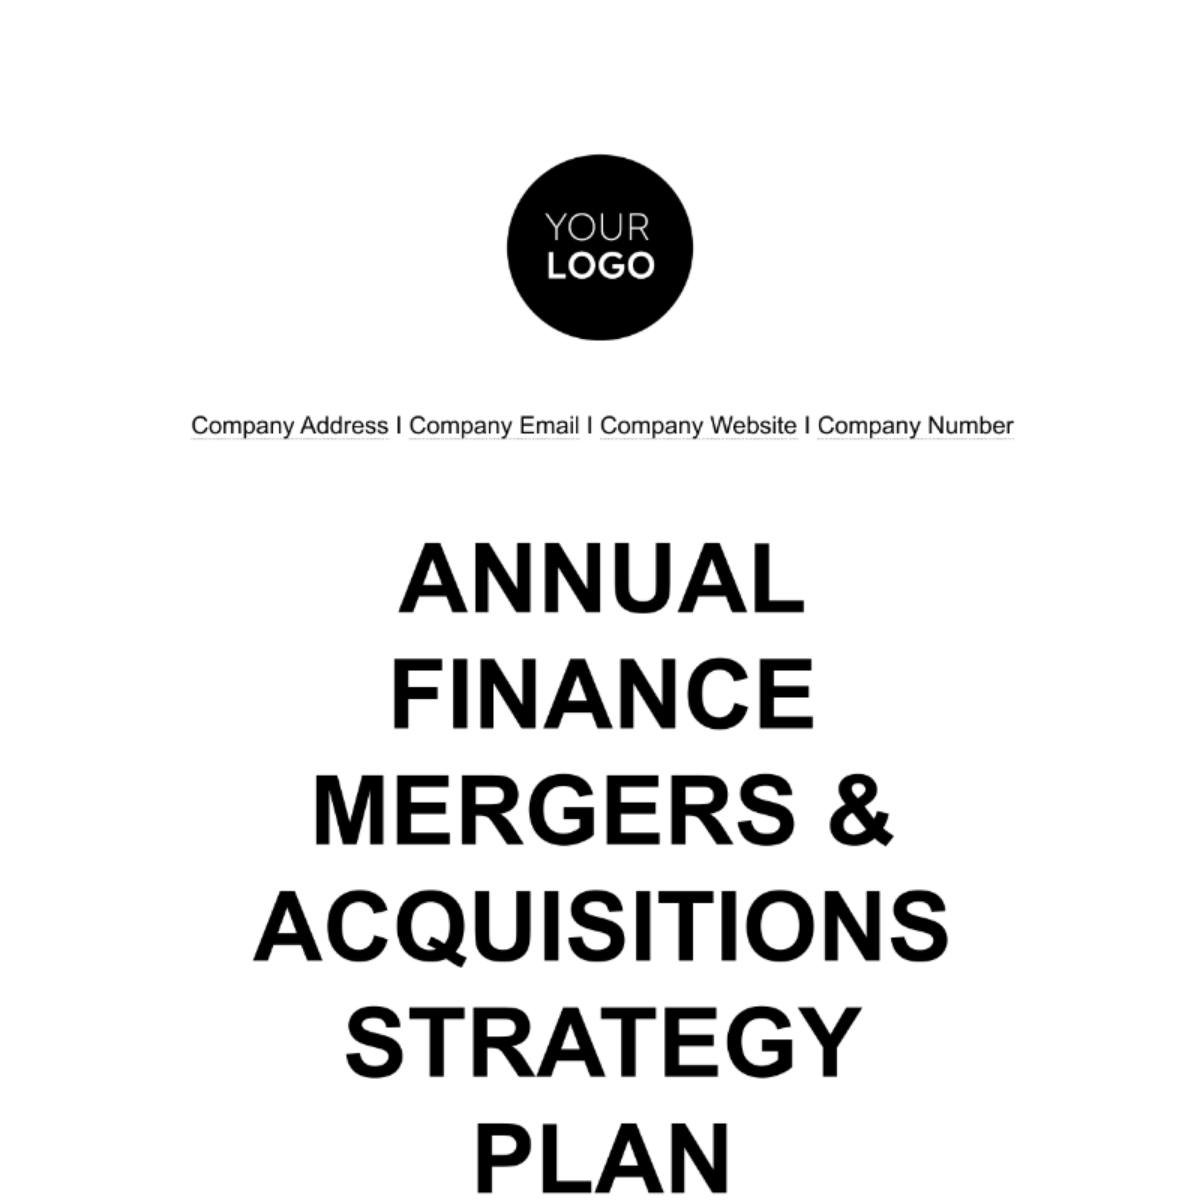 Annual Finance Mergers & Acquisitions Strategy Plan Template